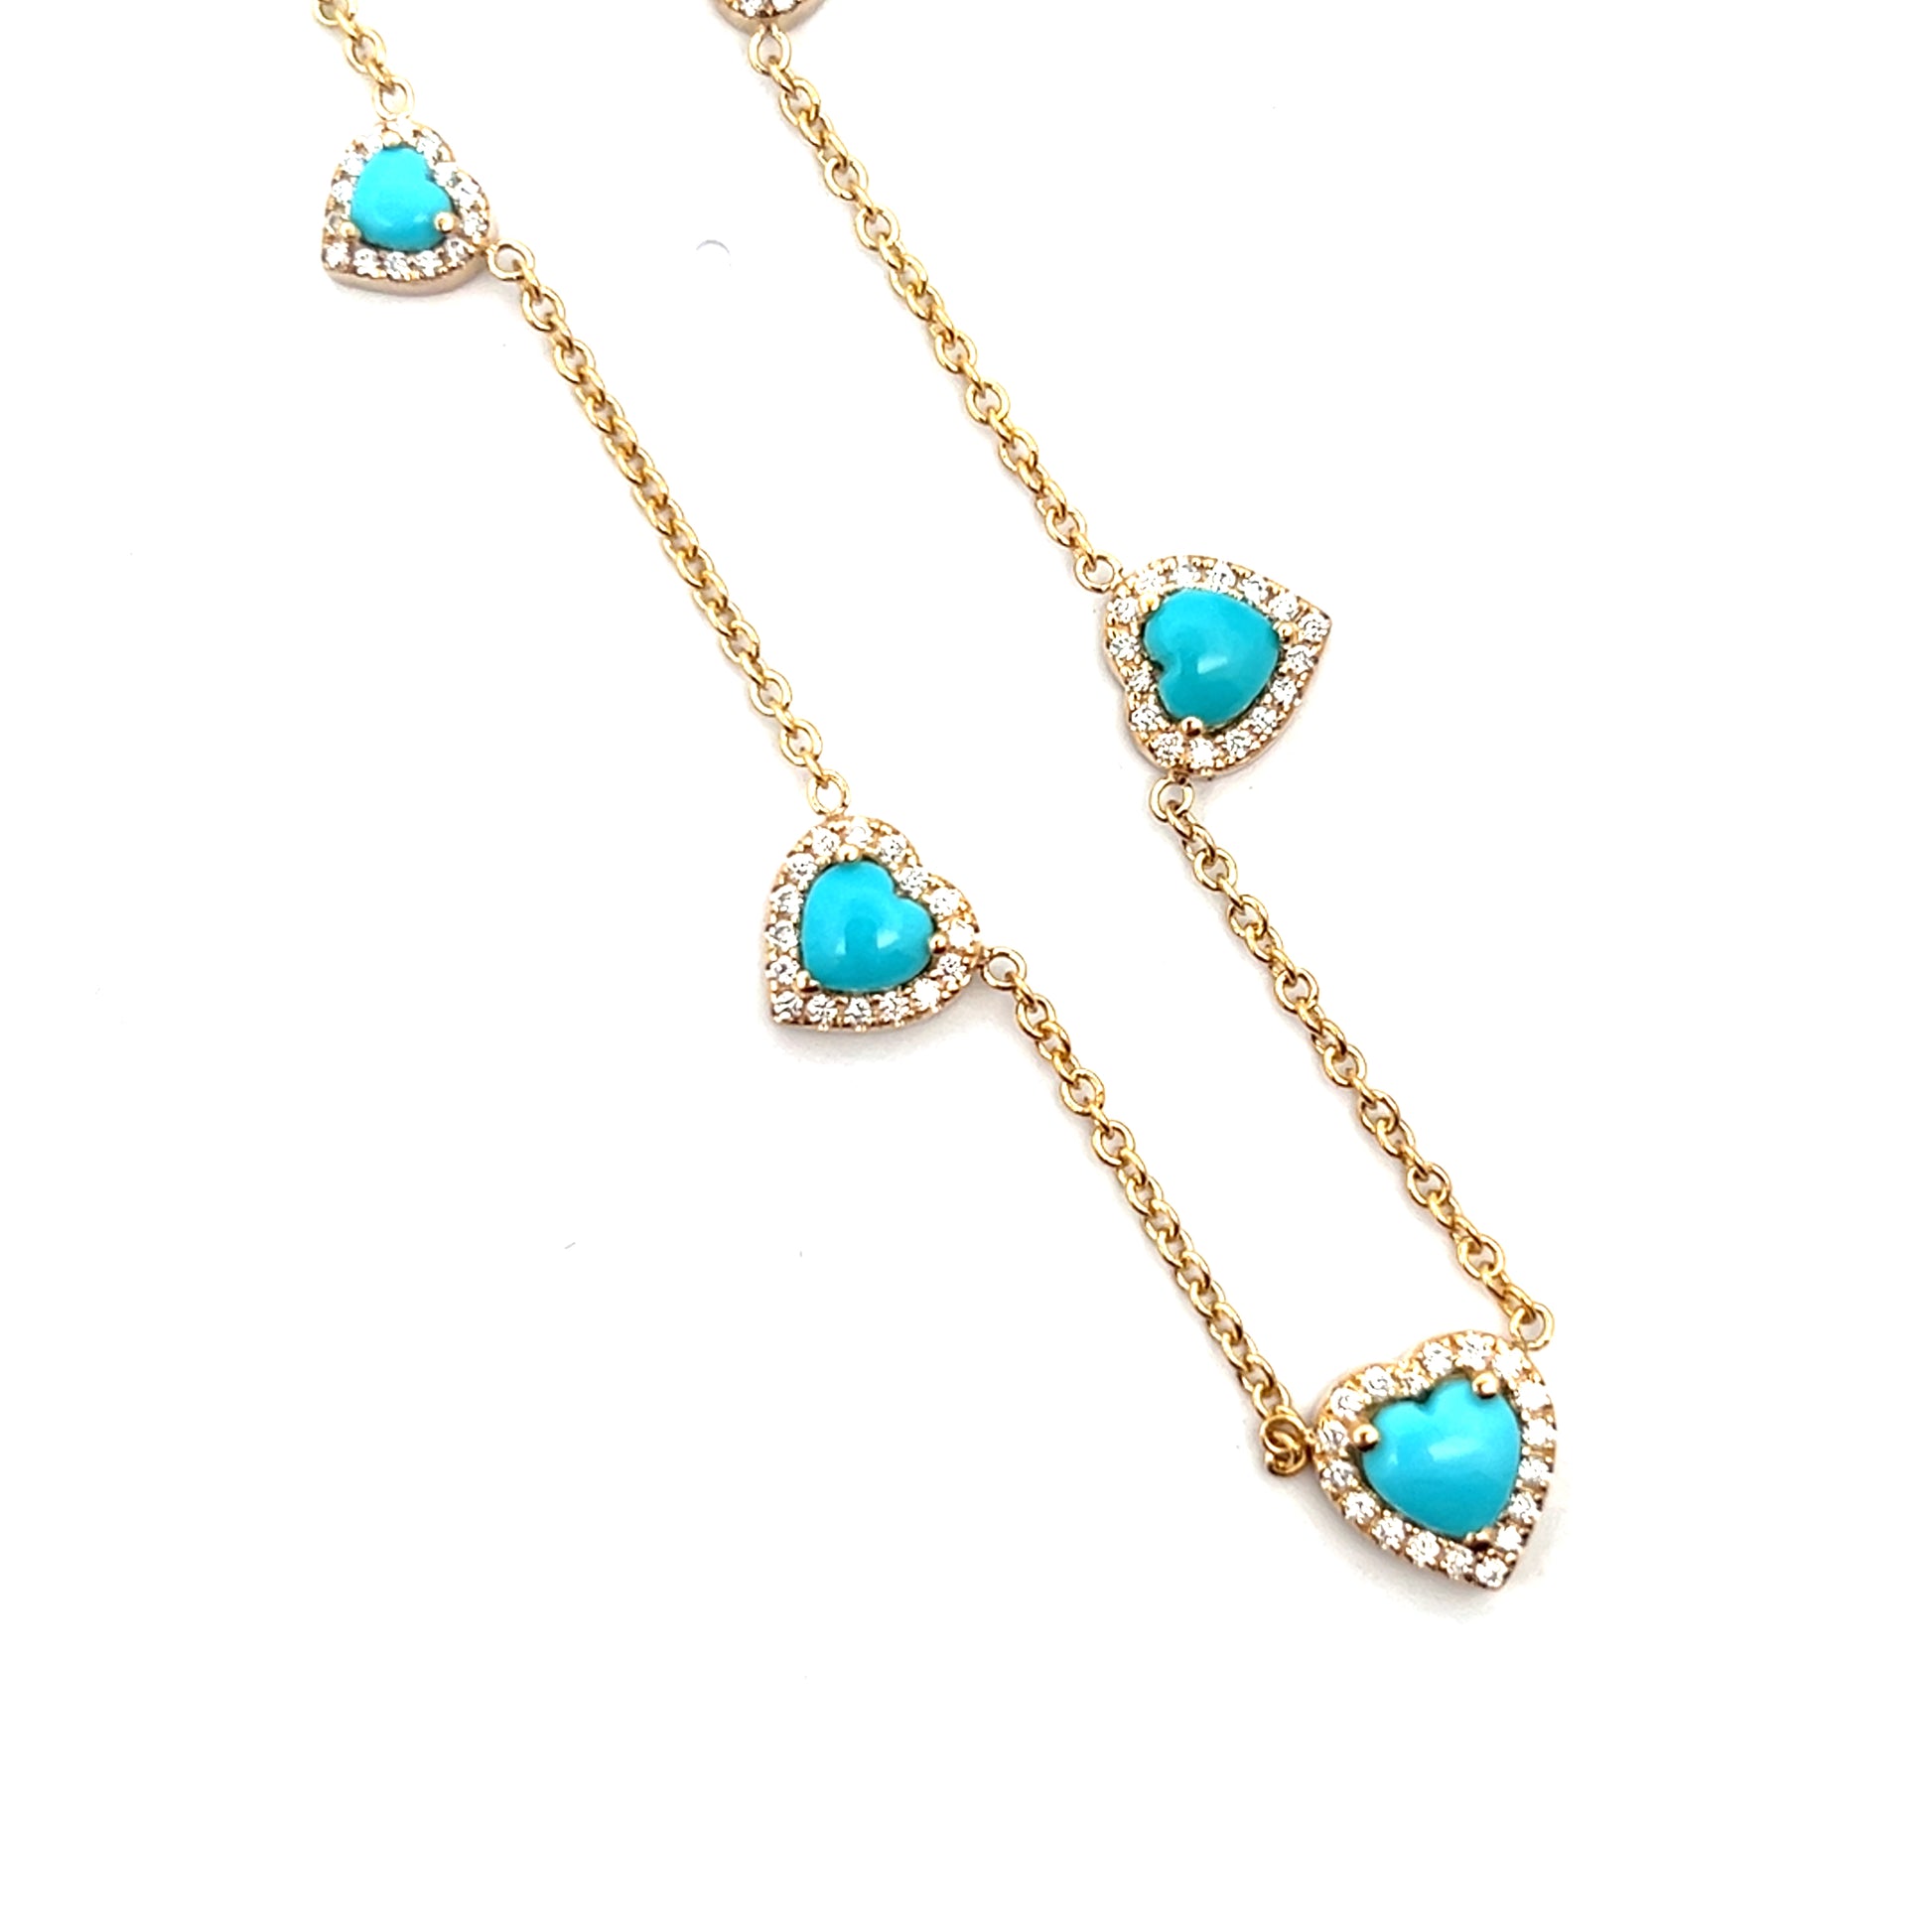 1cttw Turquoise Heart Necklace | Klein's Jewelry Houston